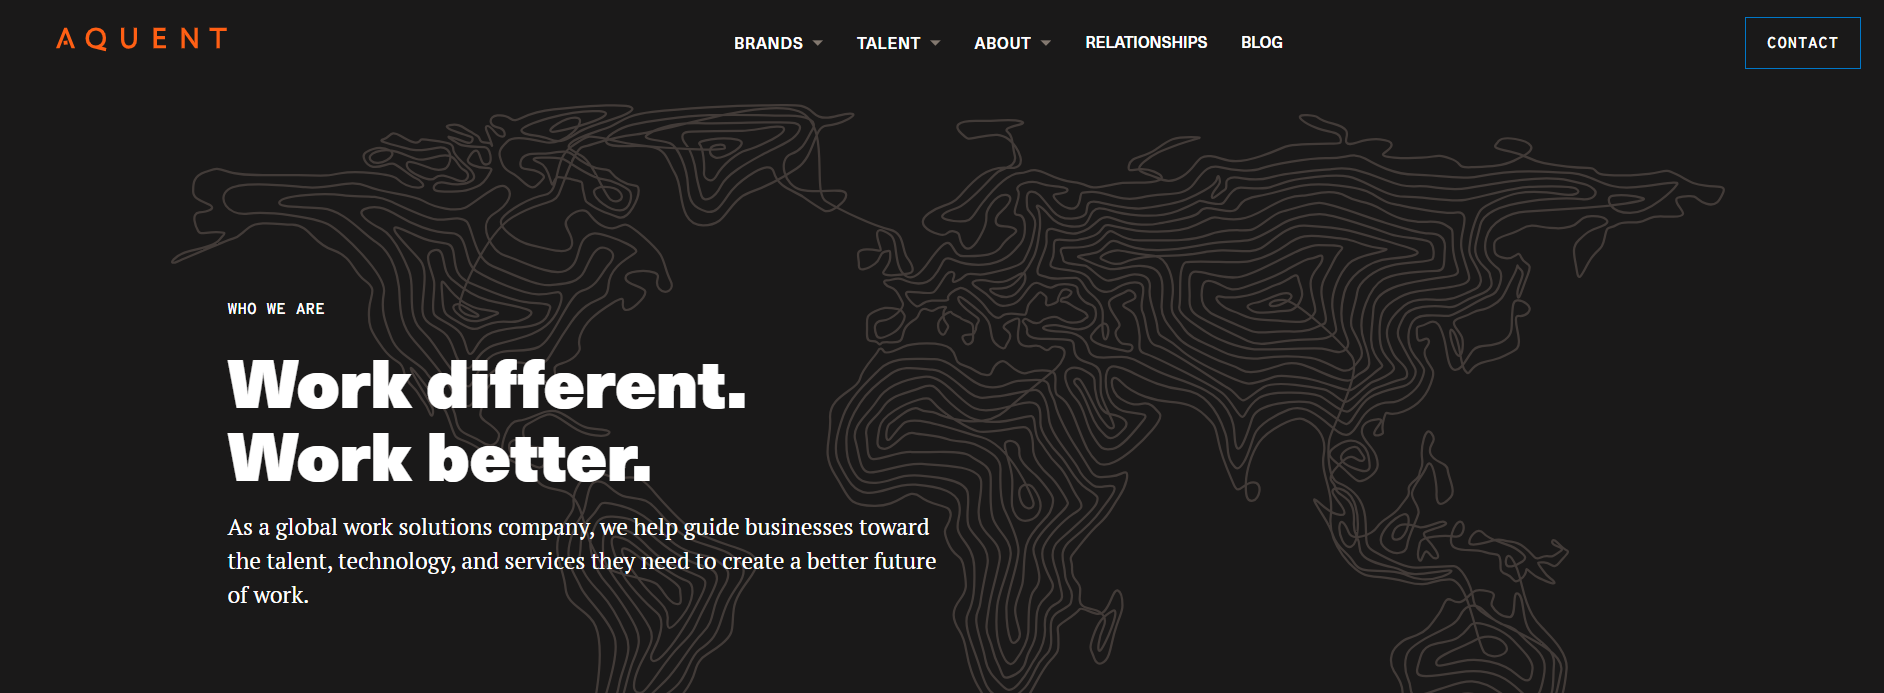 Aquent landing page